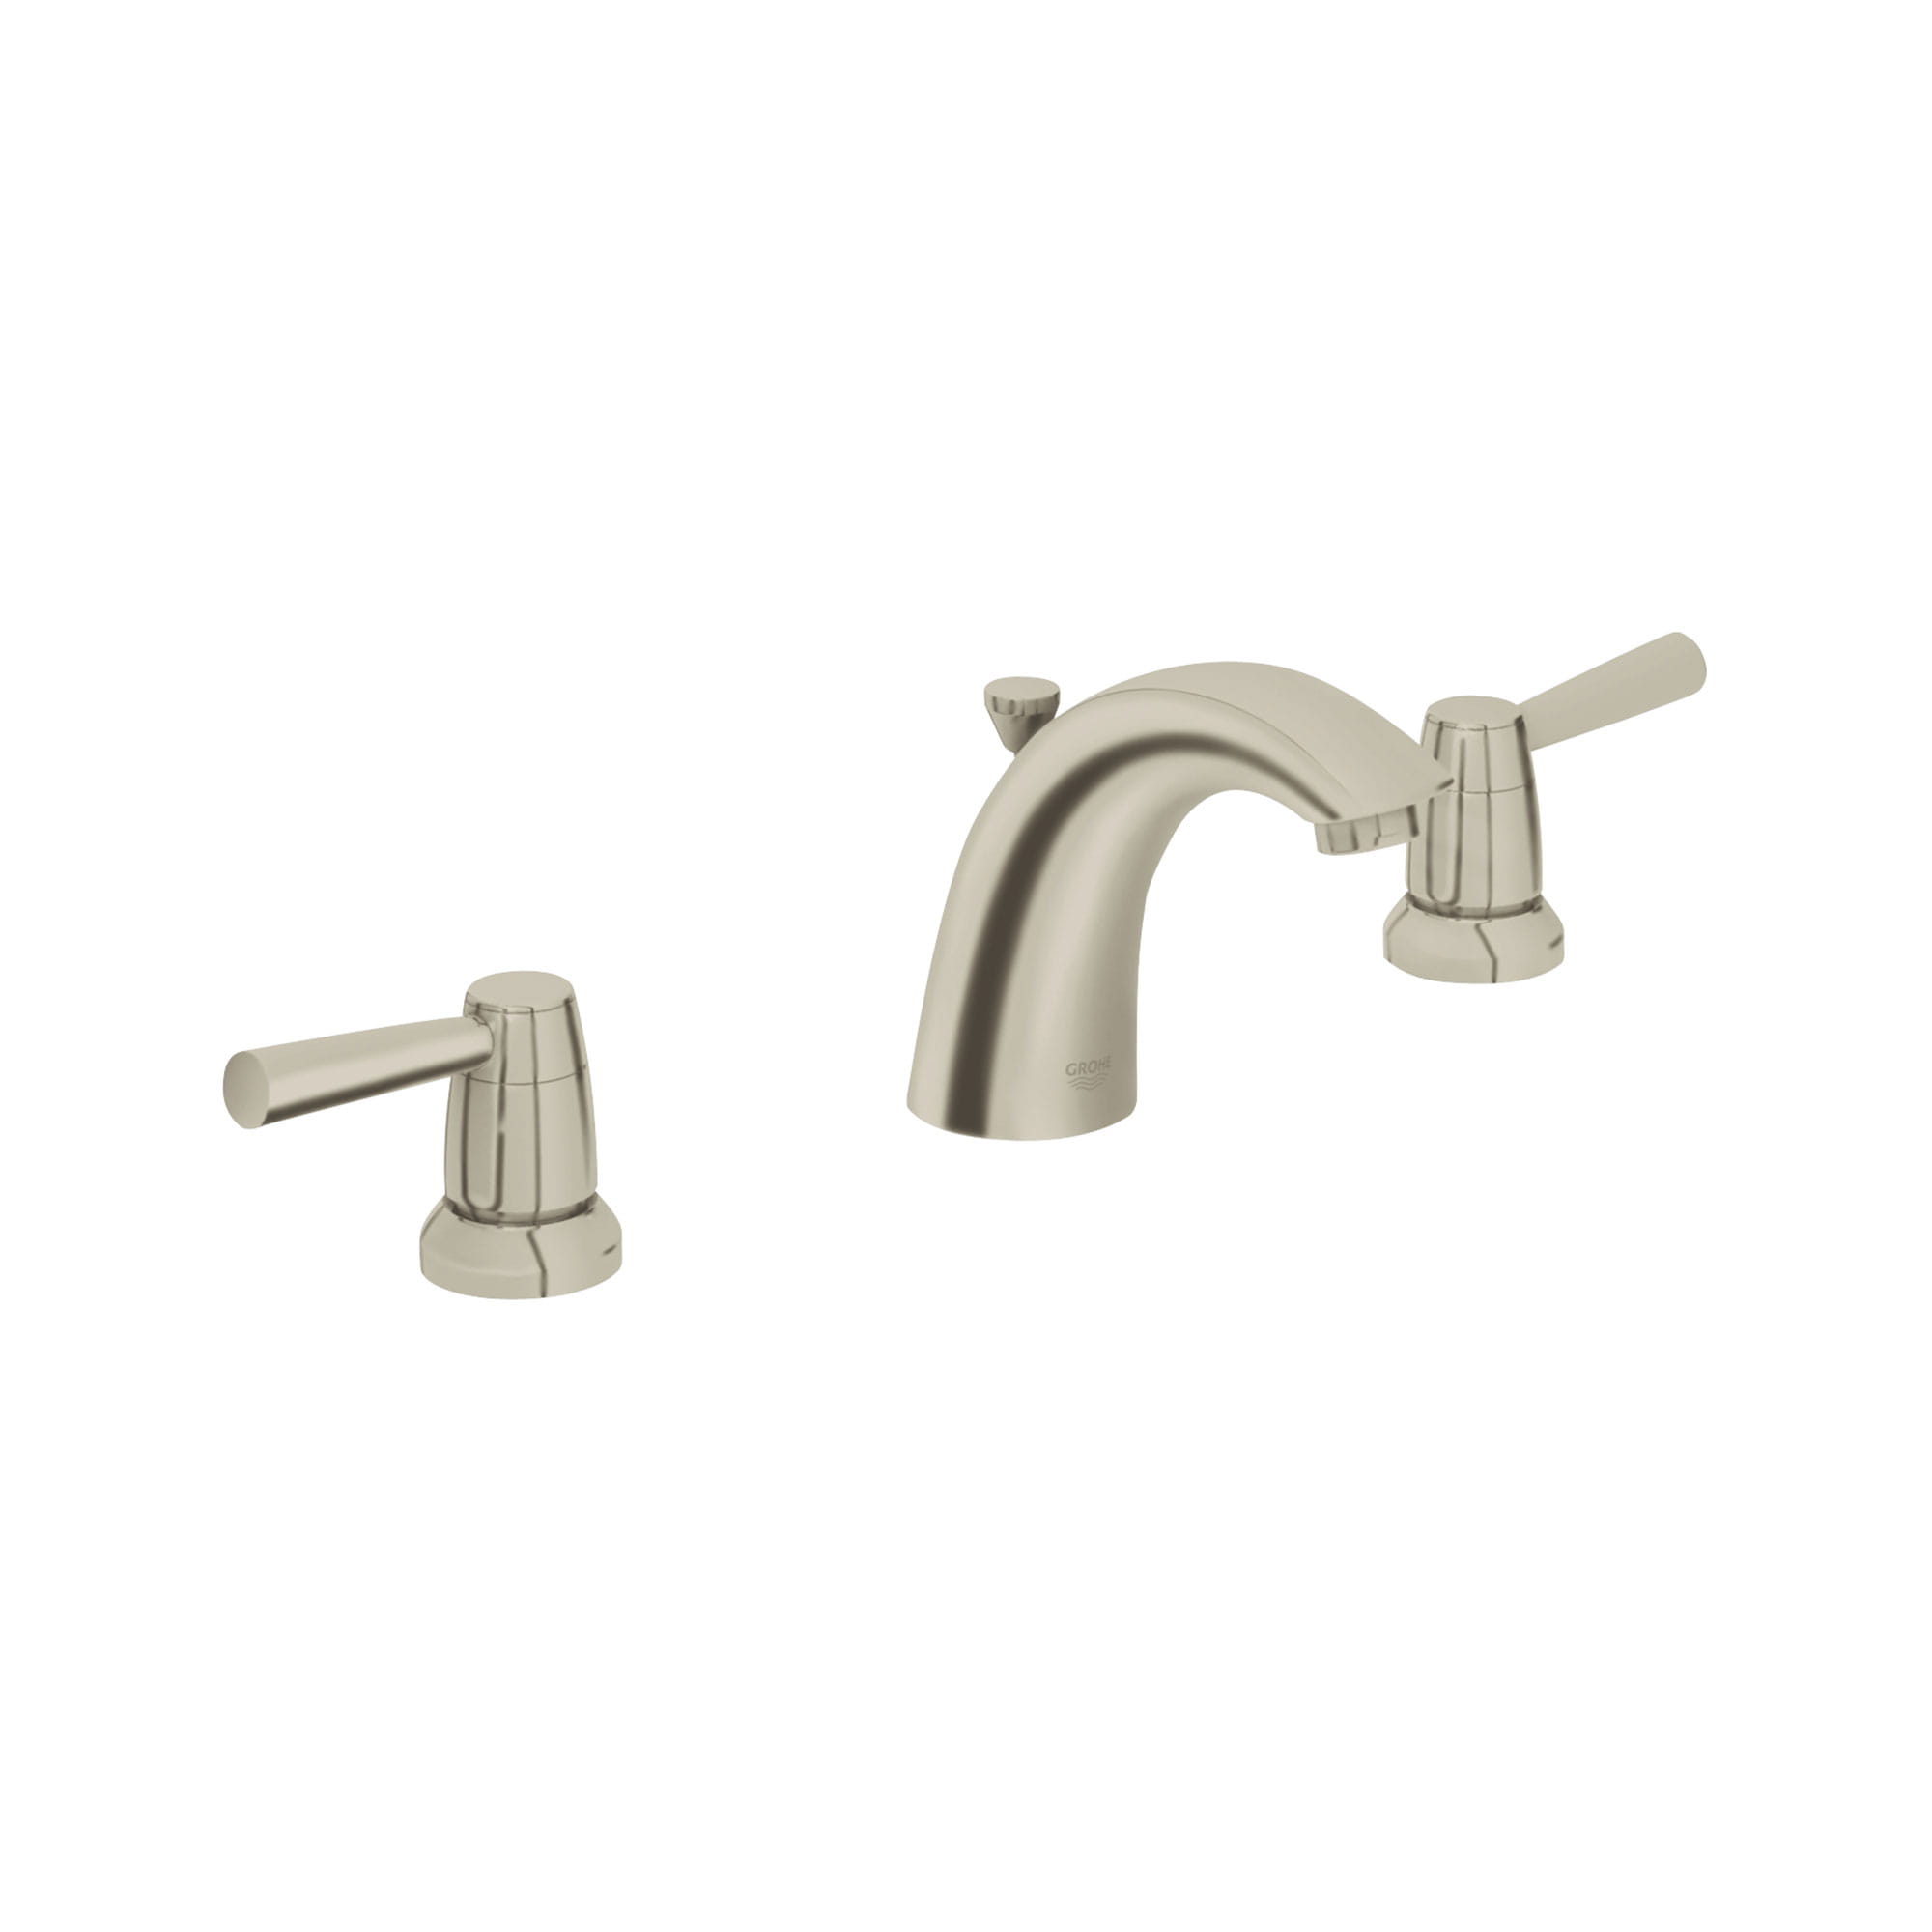 Lavatory 8 in Widespread 2 Handle Bathroom Faucet   12 GPM GROHE BRUSHED NICKEL